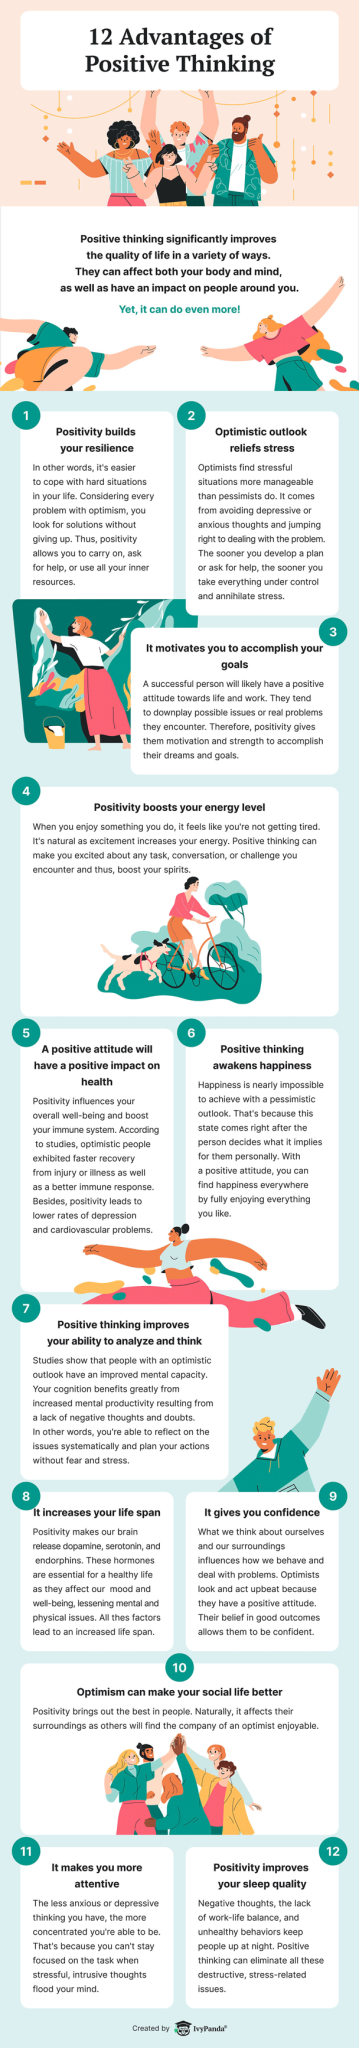 12 Advantages of Positive Thinking [Infographic] - Best Infographics